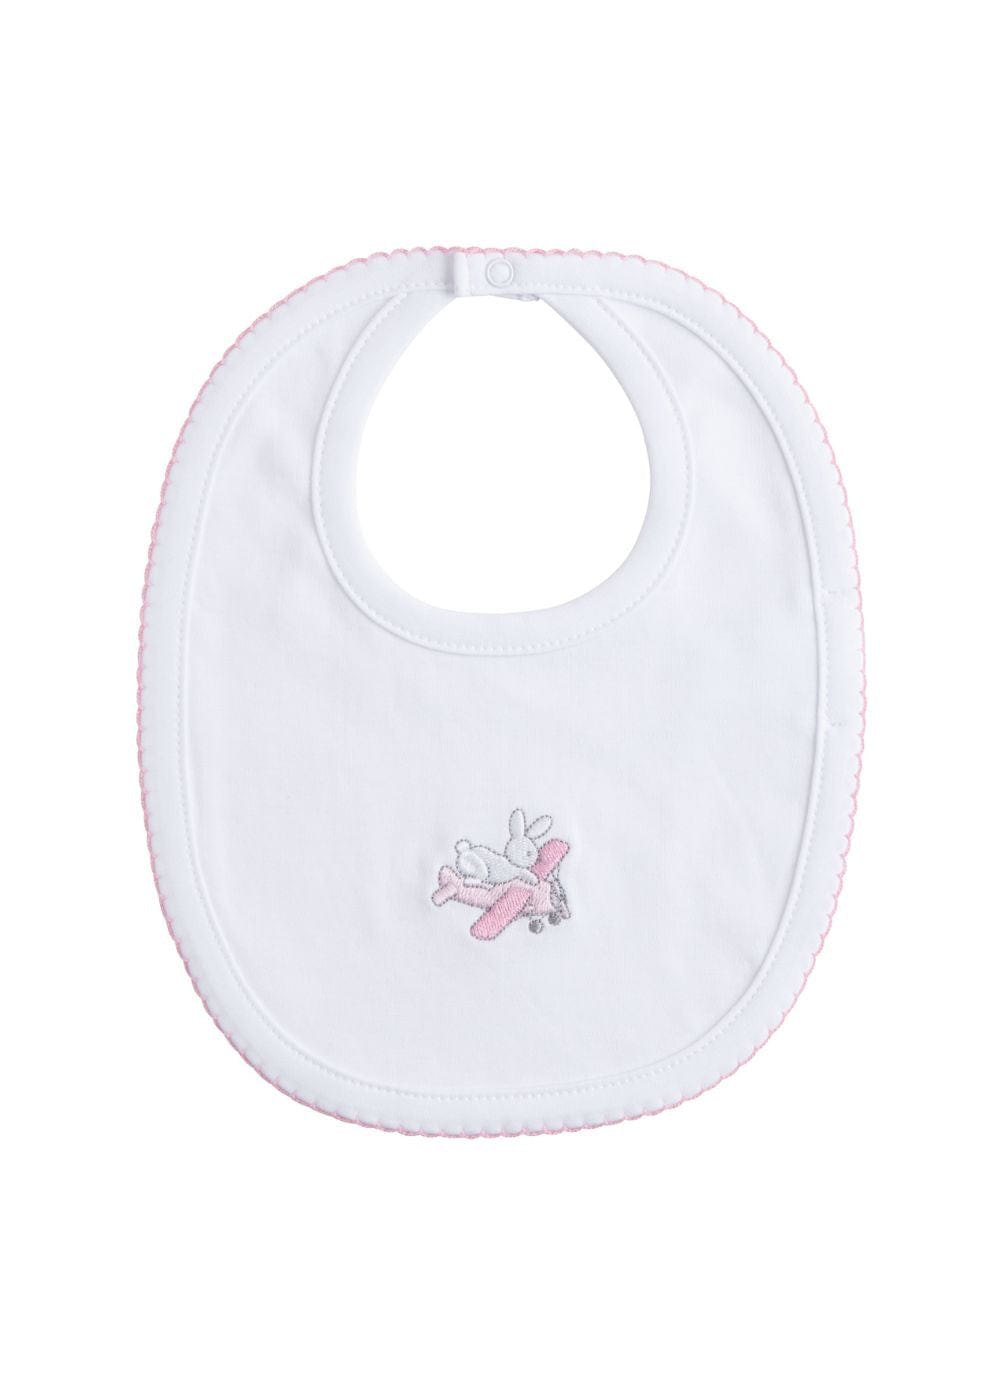 seguridadindustrialcr baby girl embroidered bib, pink bunny design for easter